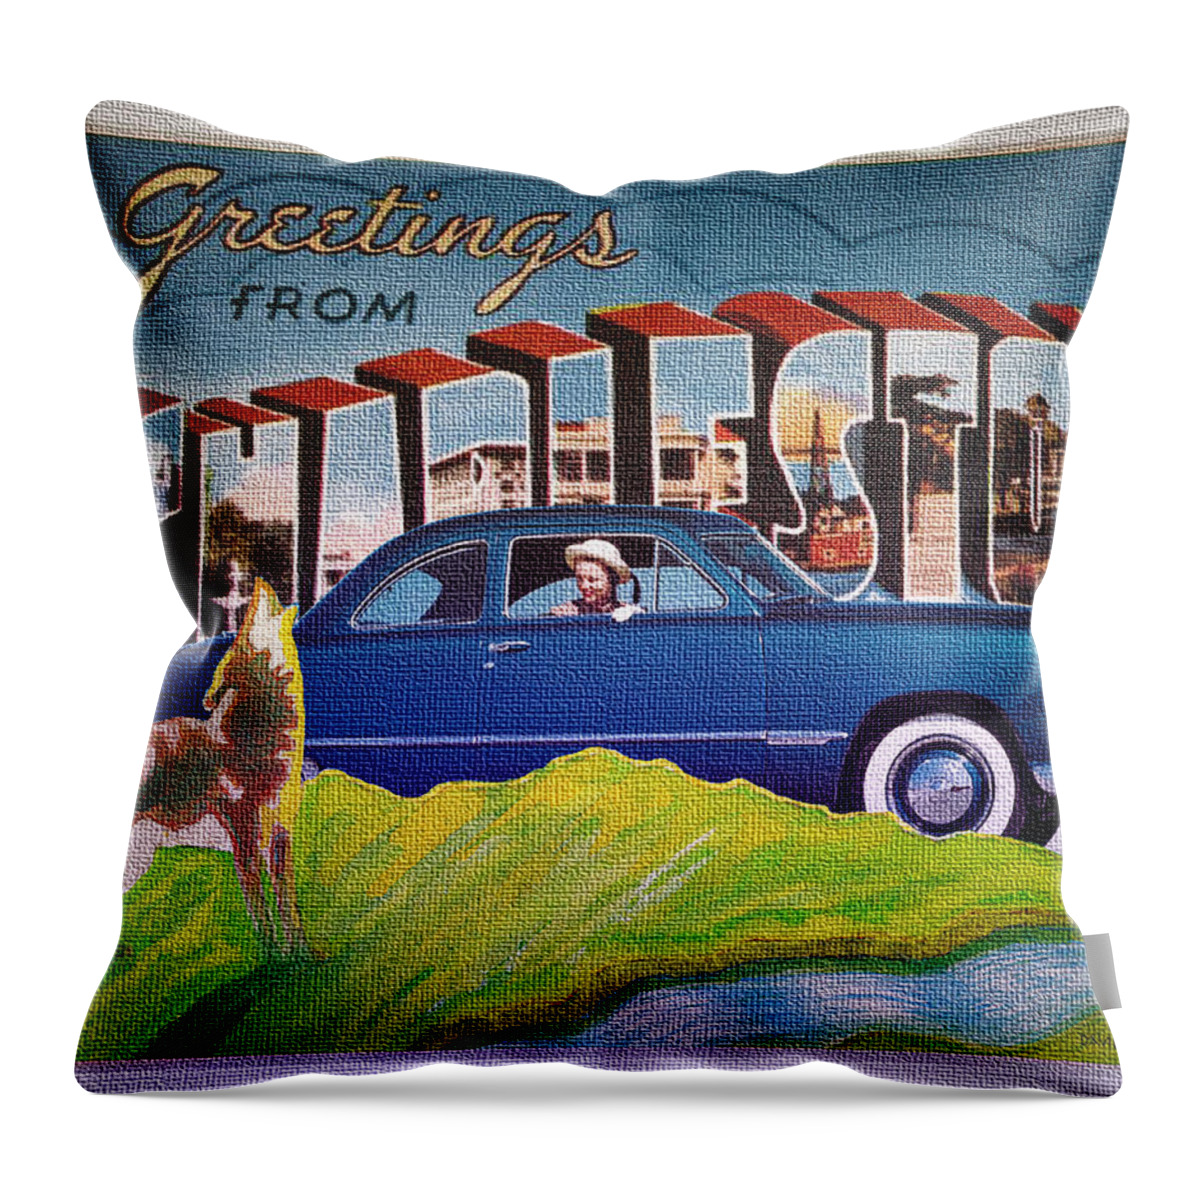 Dixie Road Trips Throw Pillow featuring the digital art Dixie Road Trips / Charleston by David Squibb